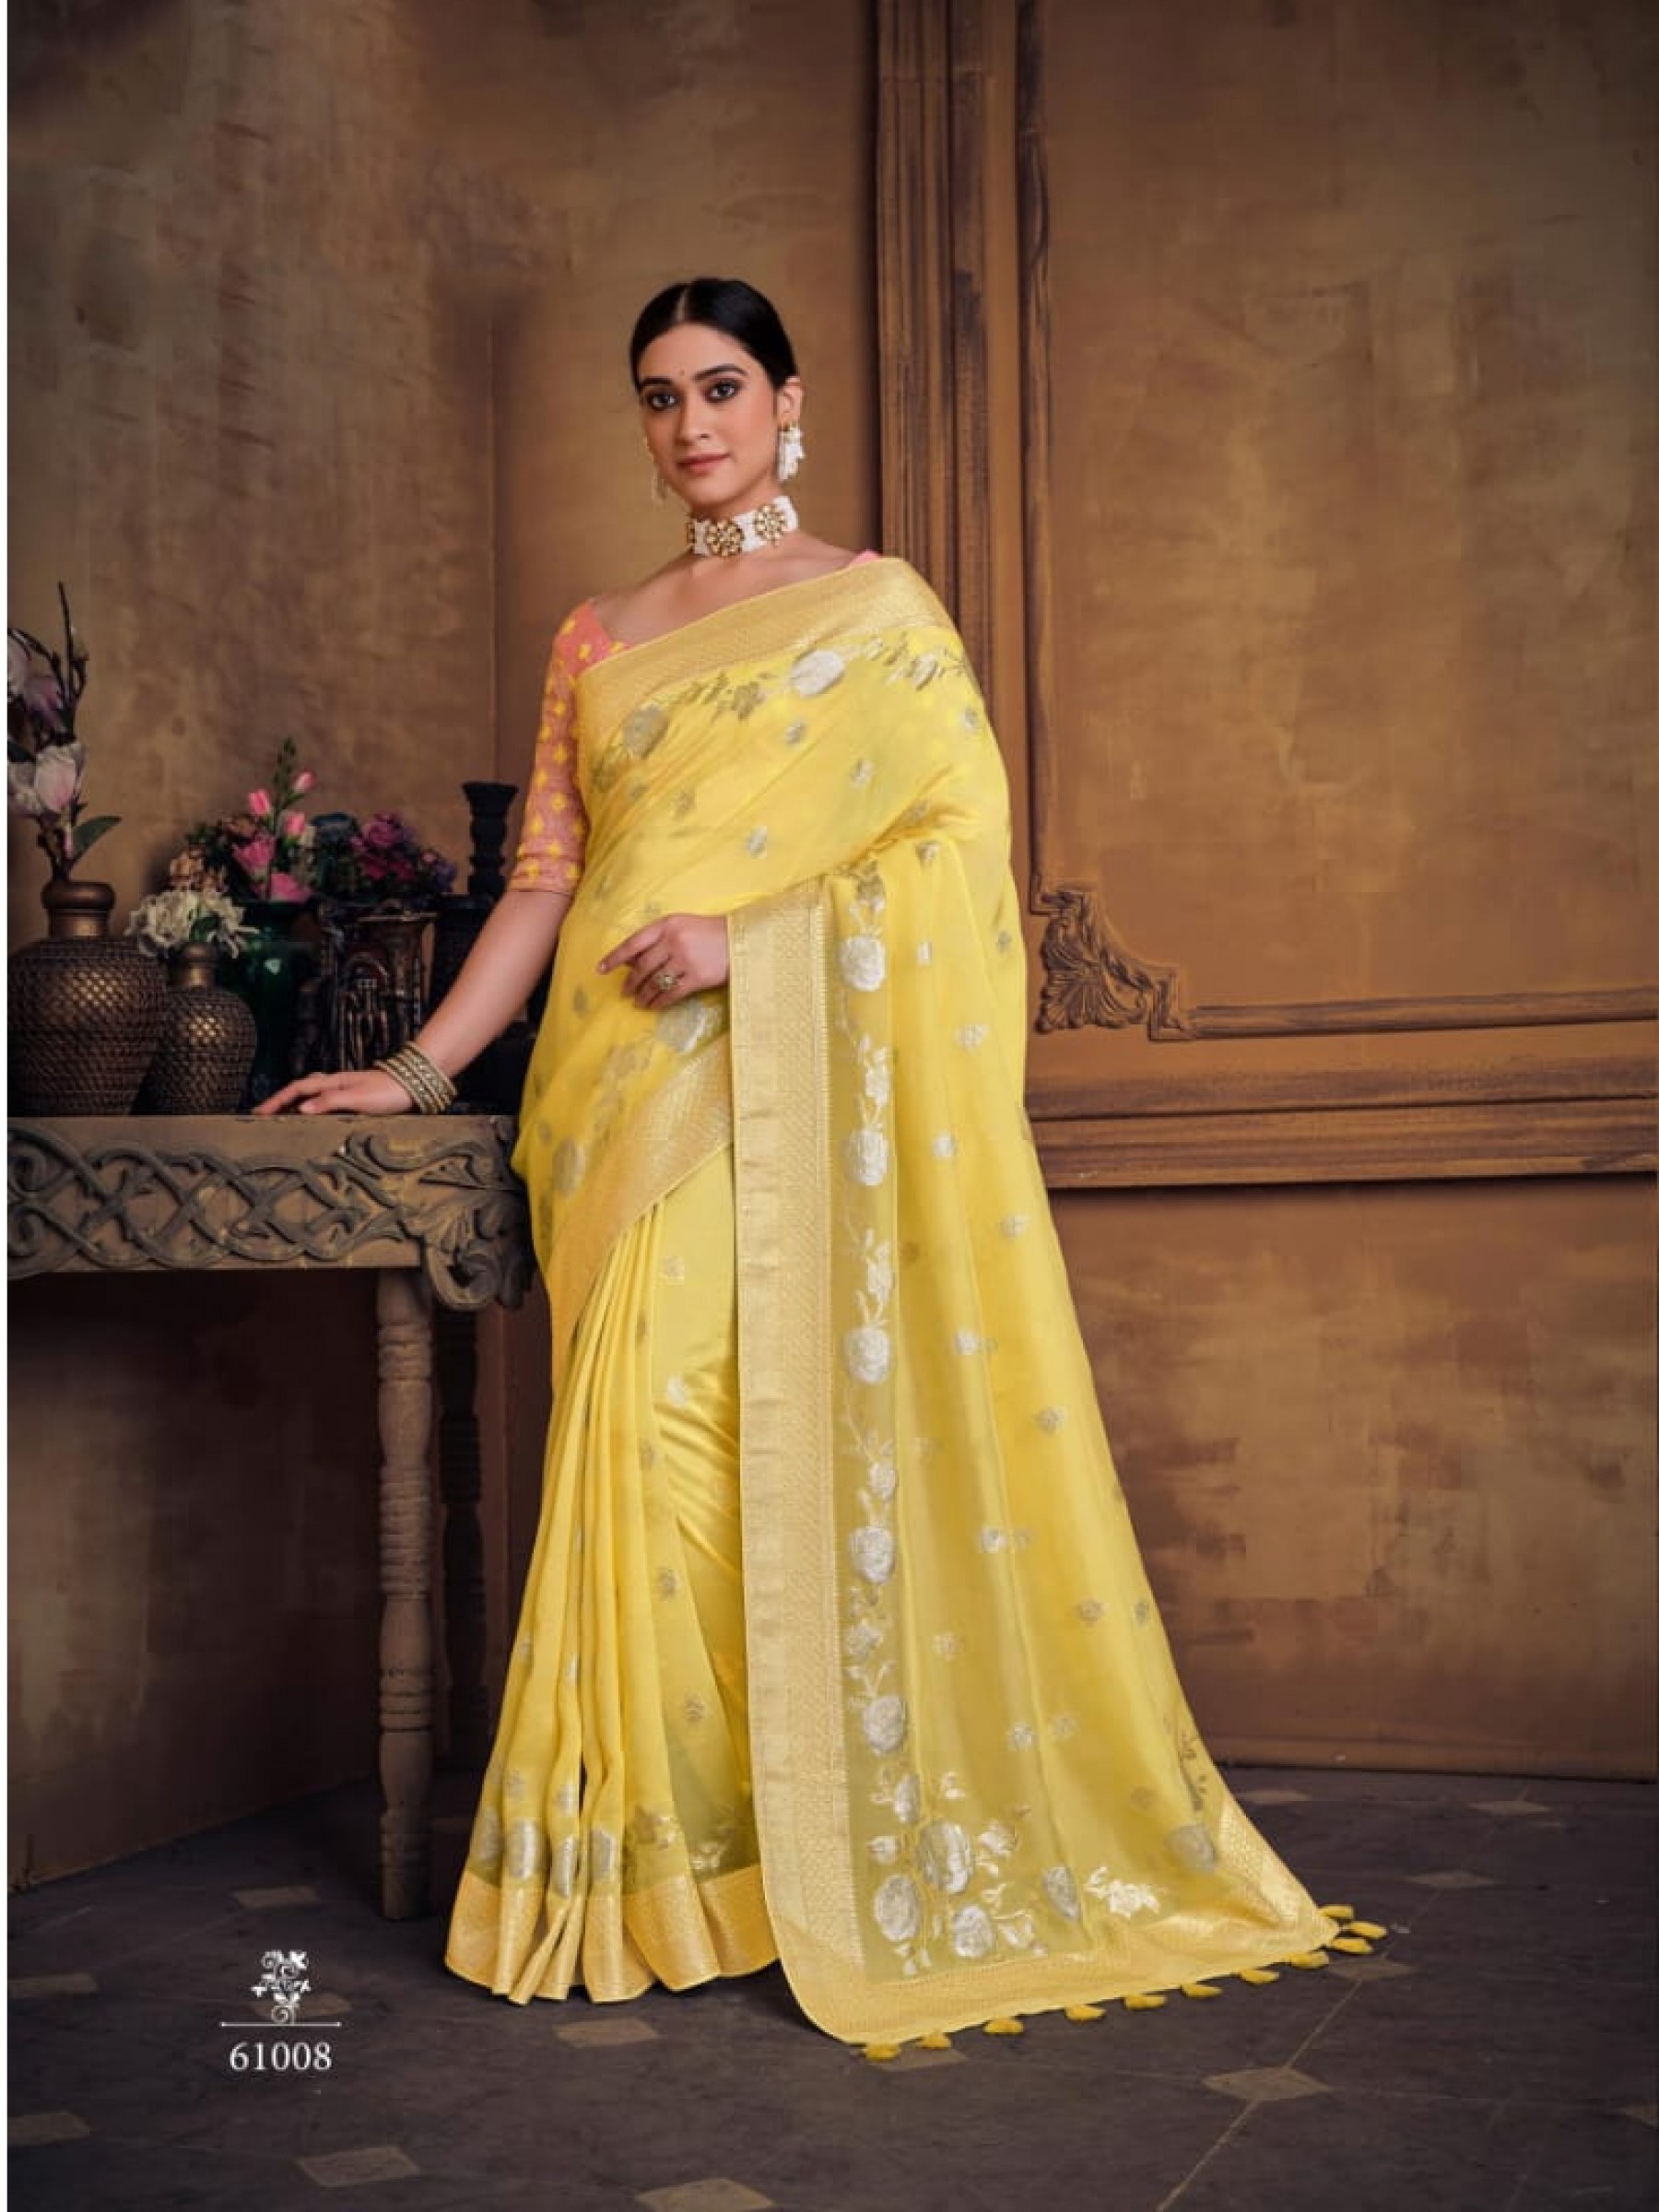 Dola Silk Saree In Yellow Color With Embroidery Work